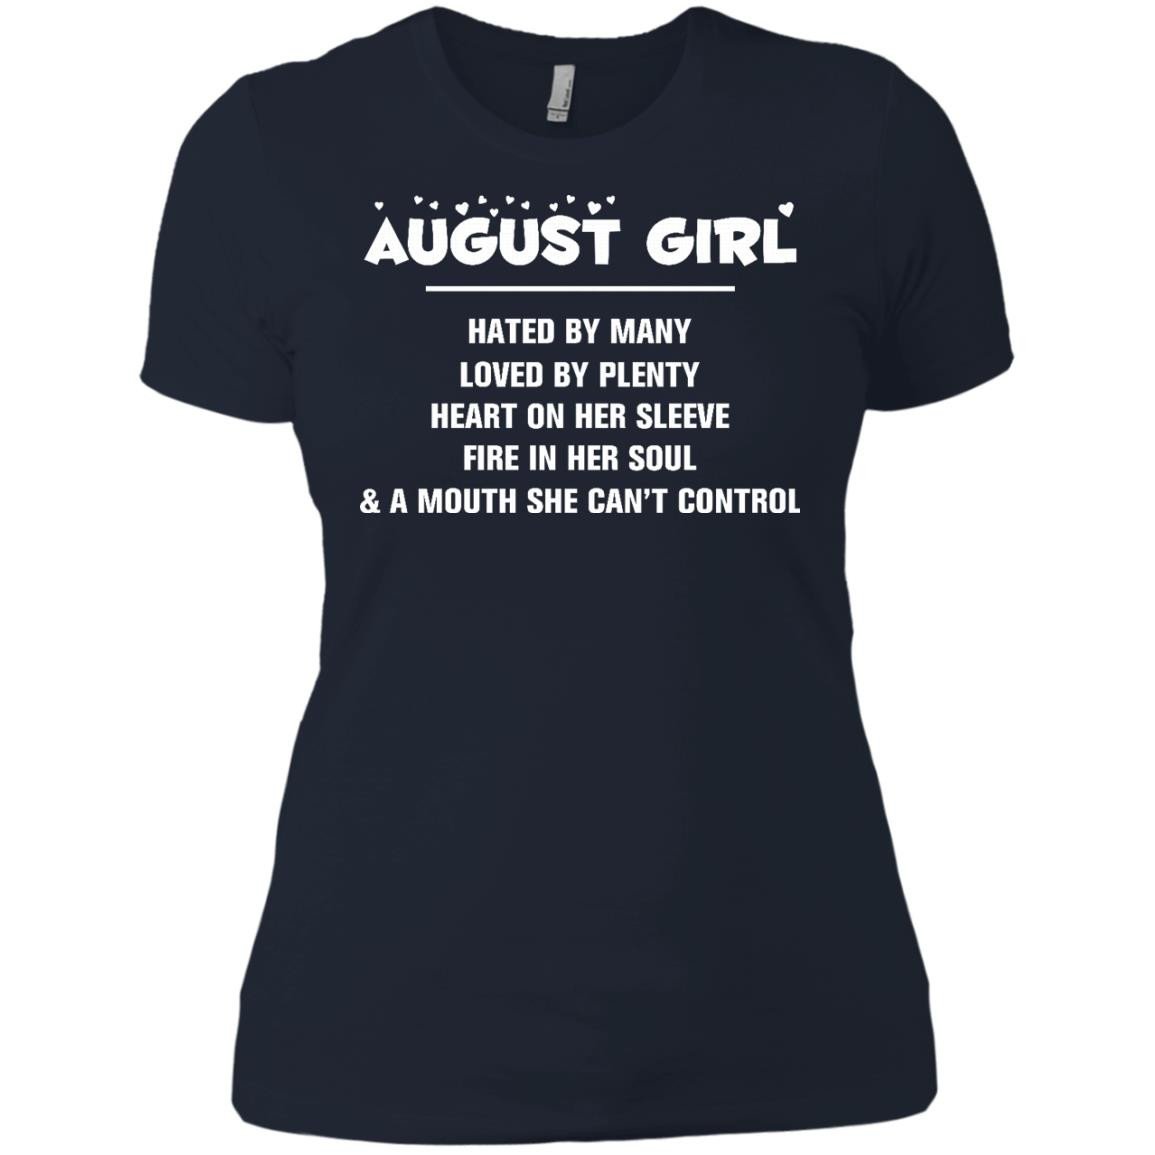 August girl - hated by many - loved by plenty - heart on her sleeve t ...